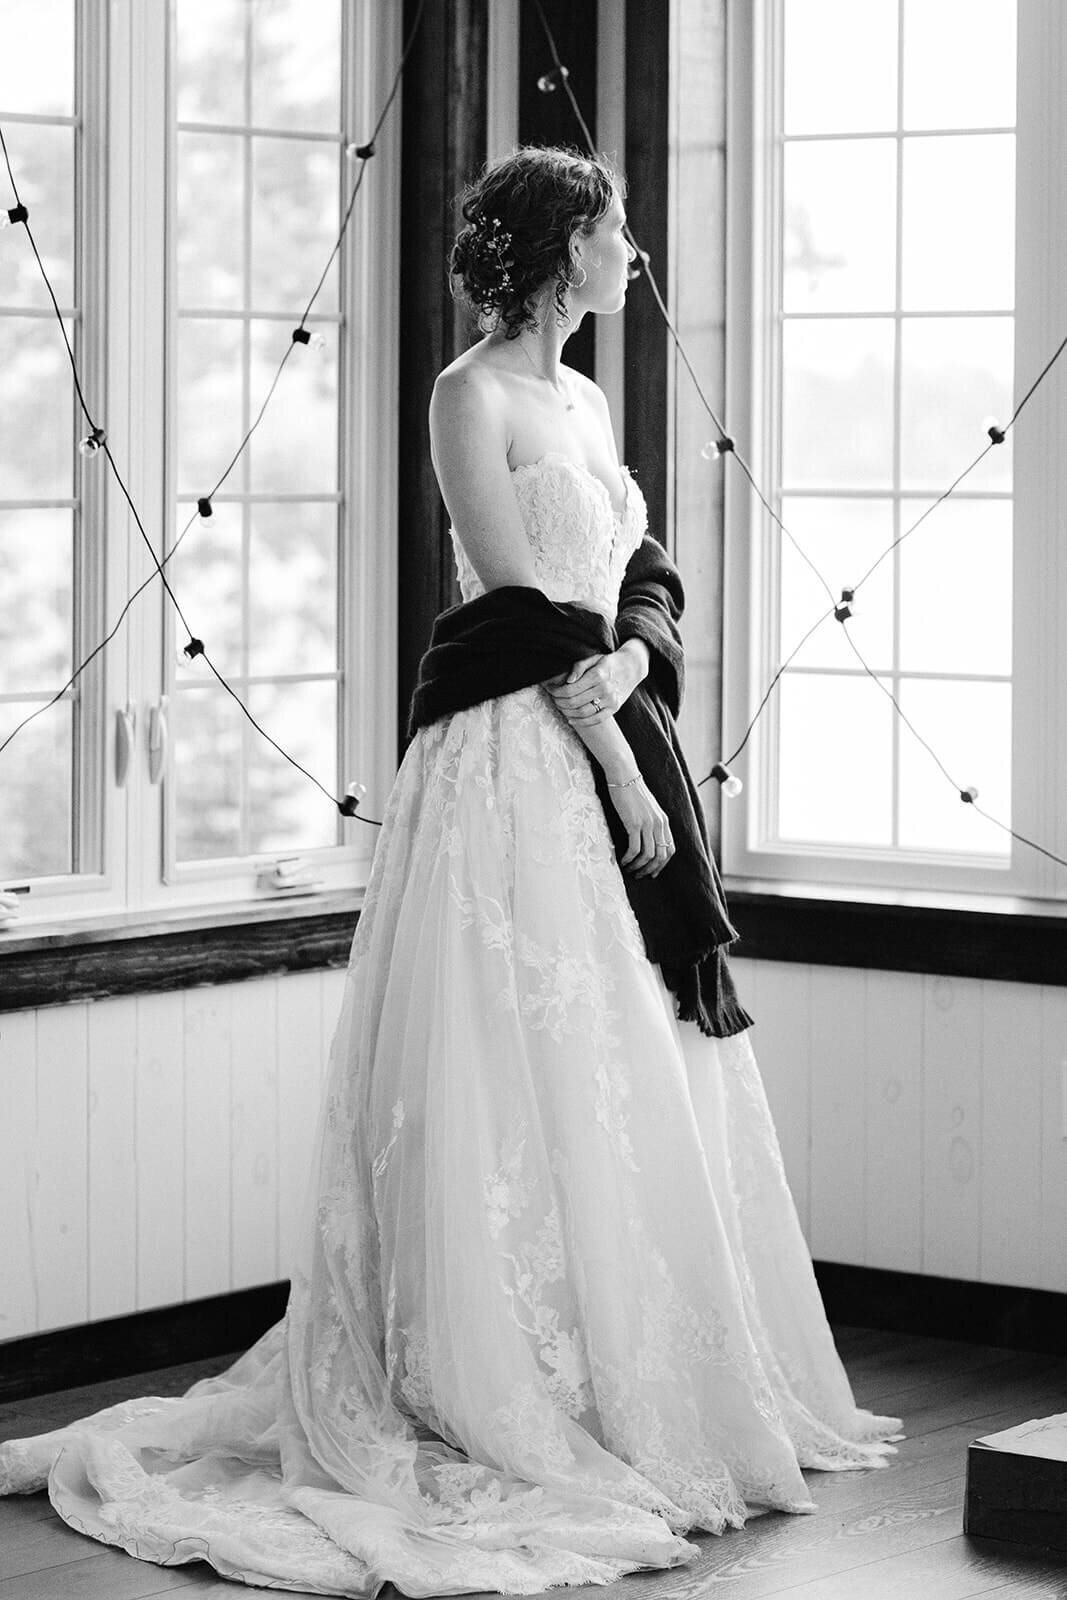 Alyssa-Marie-Photography-wedding-day-photo-bride-looks-out-window